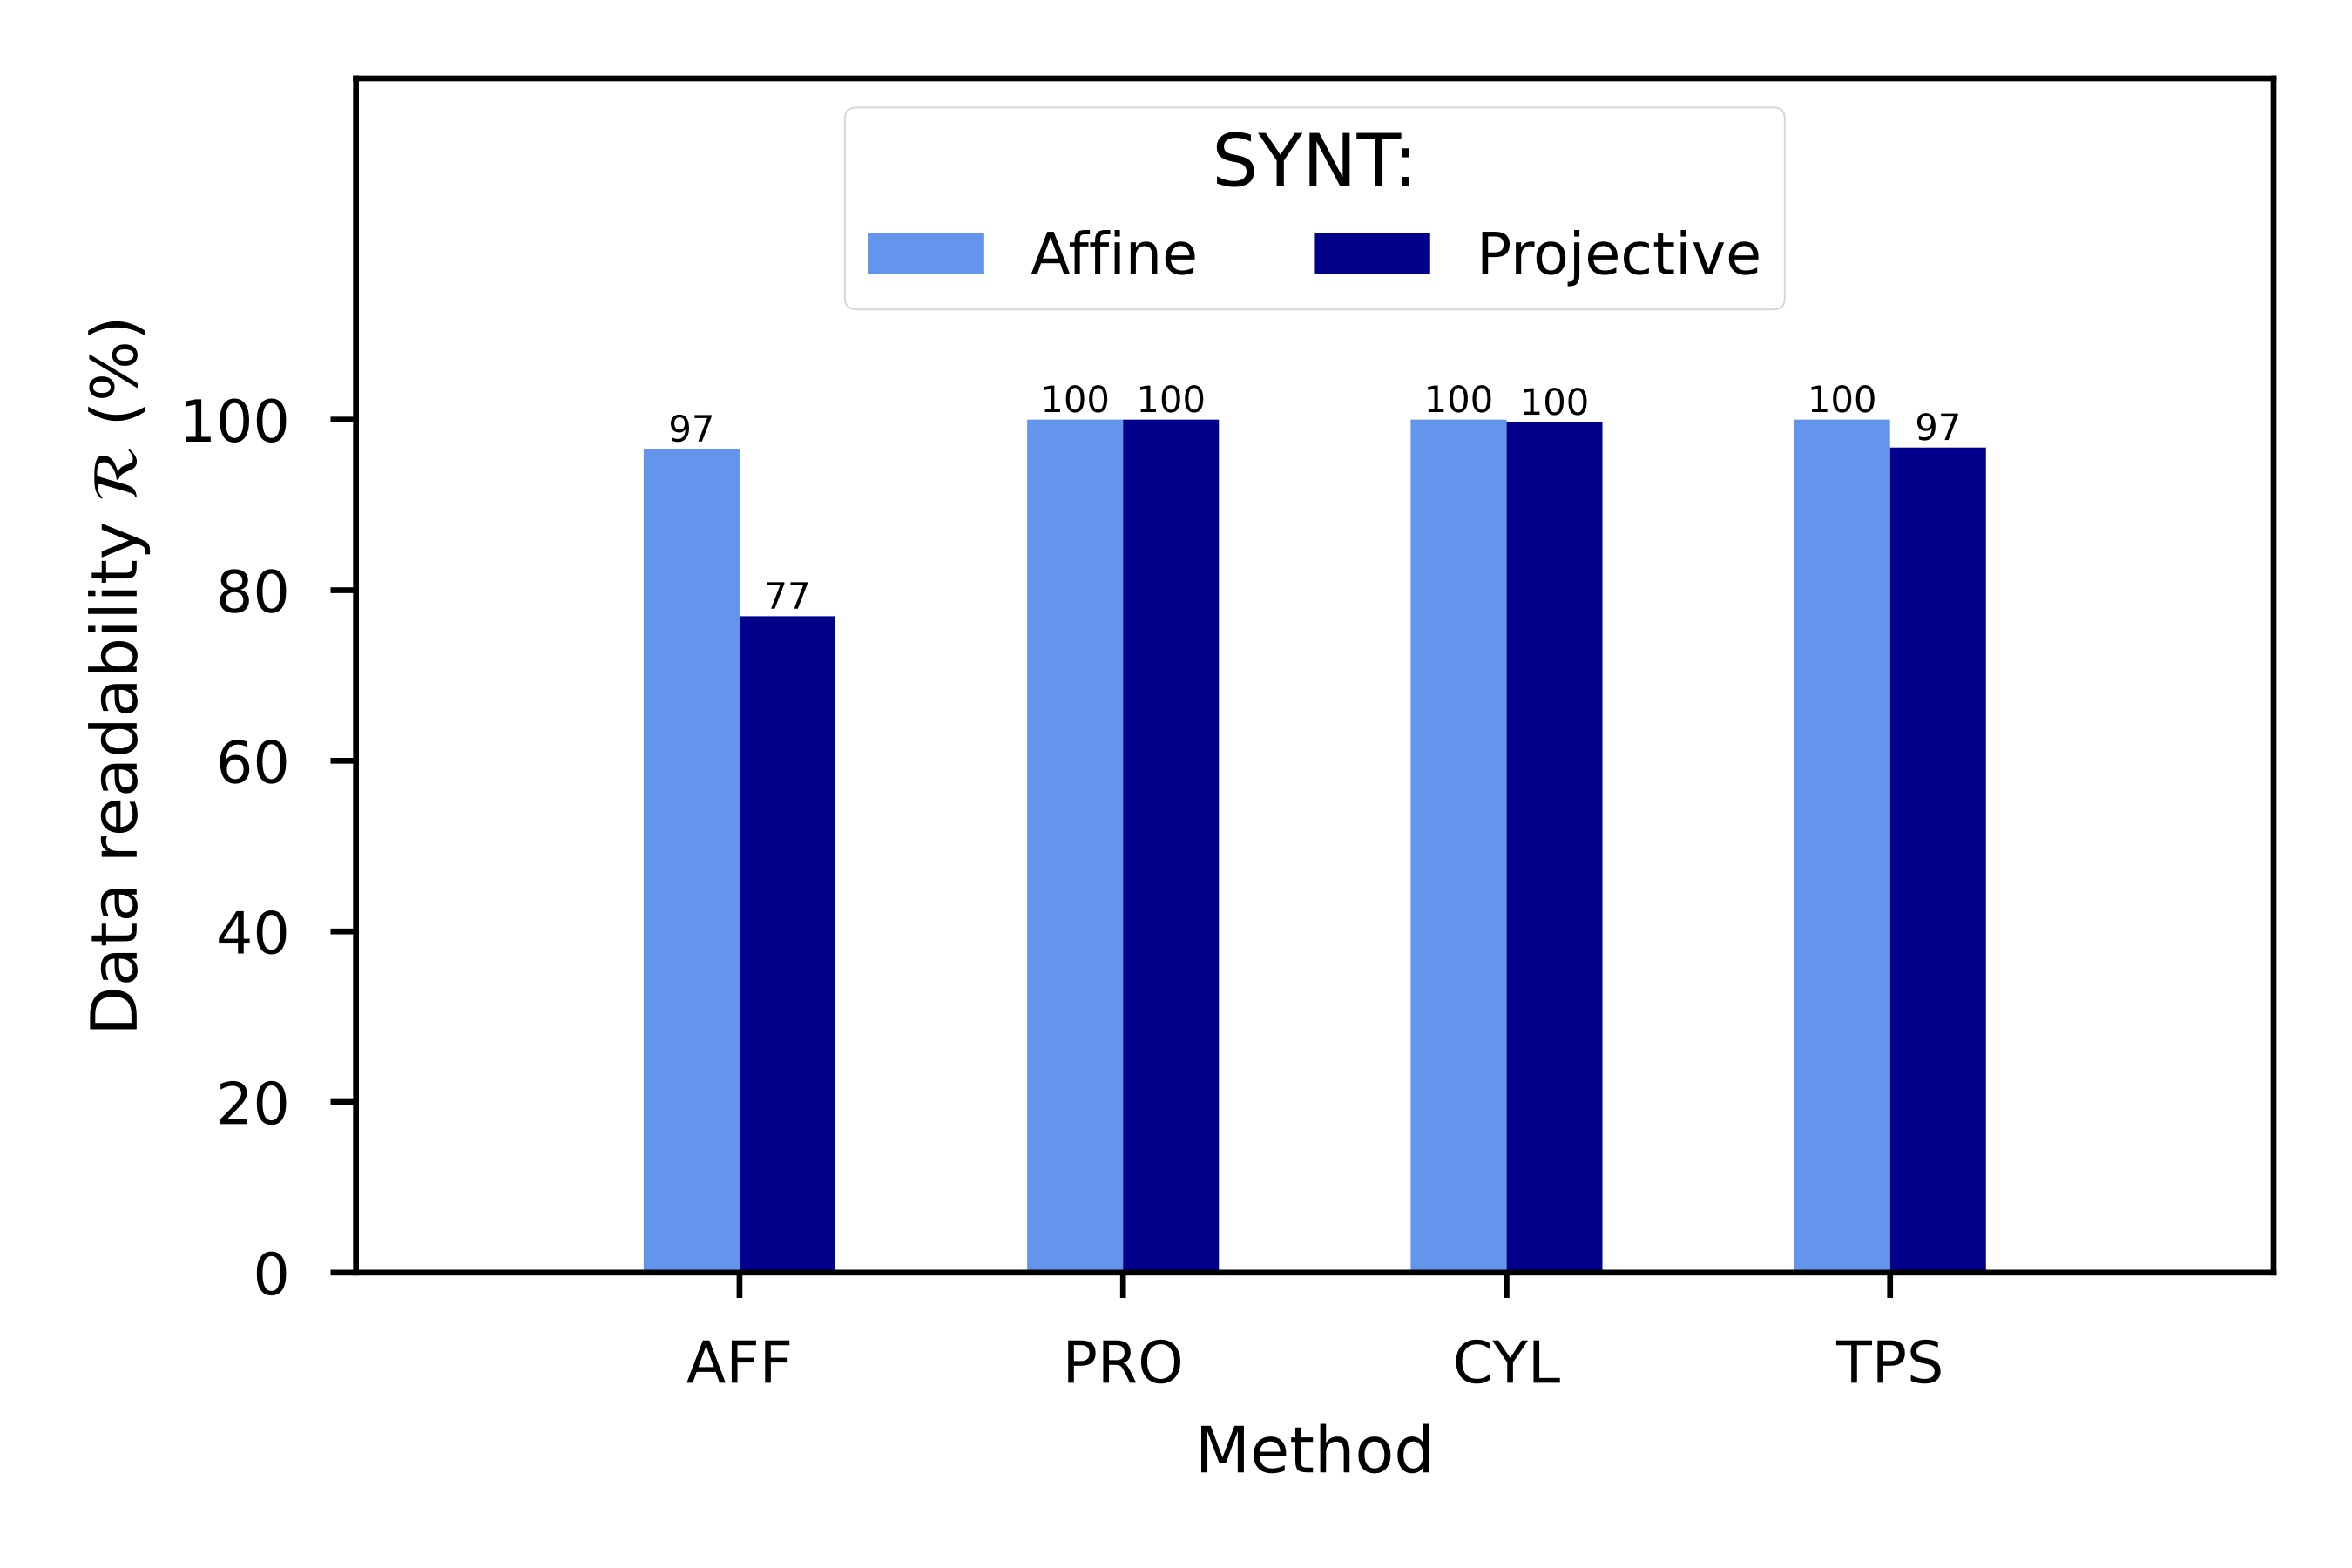 Data readability (\mathcal{R}) of the SYNT dataset, segregated by the kind of deformation (affine or perspective) that the QR Codes were exposed to, for each transformation method (AFF, PRO, CYL and TPS).